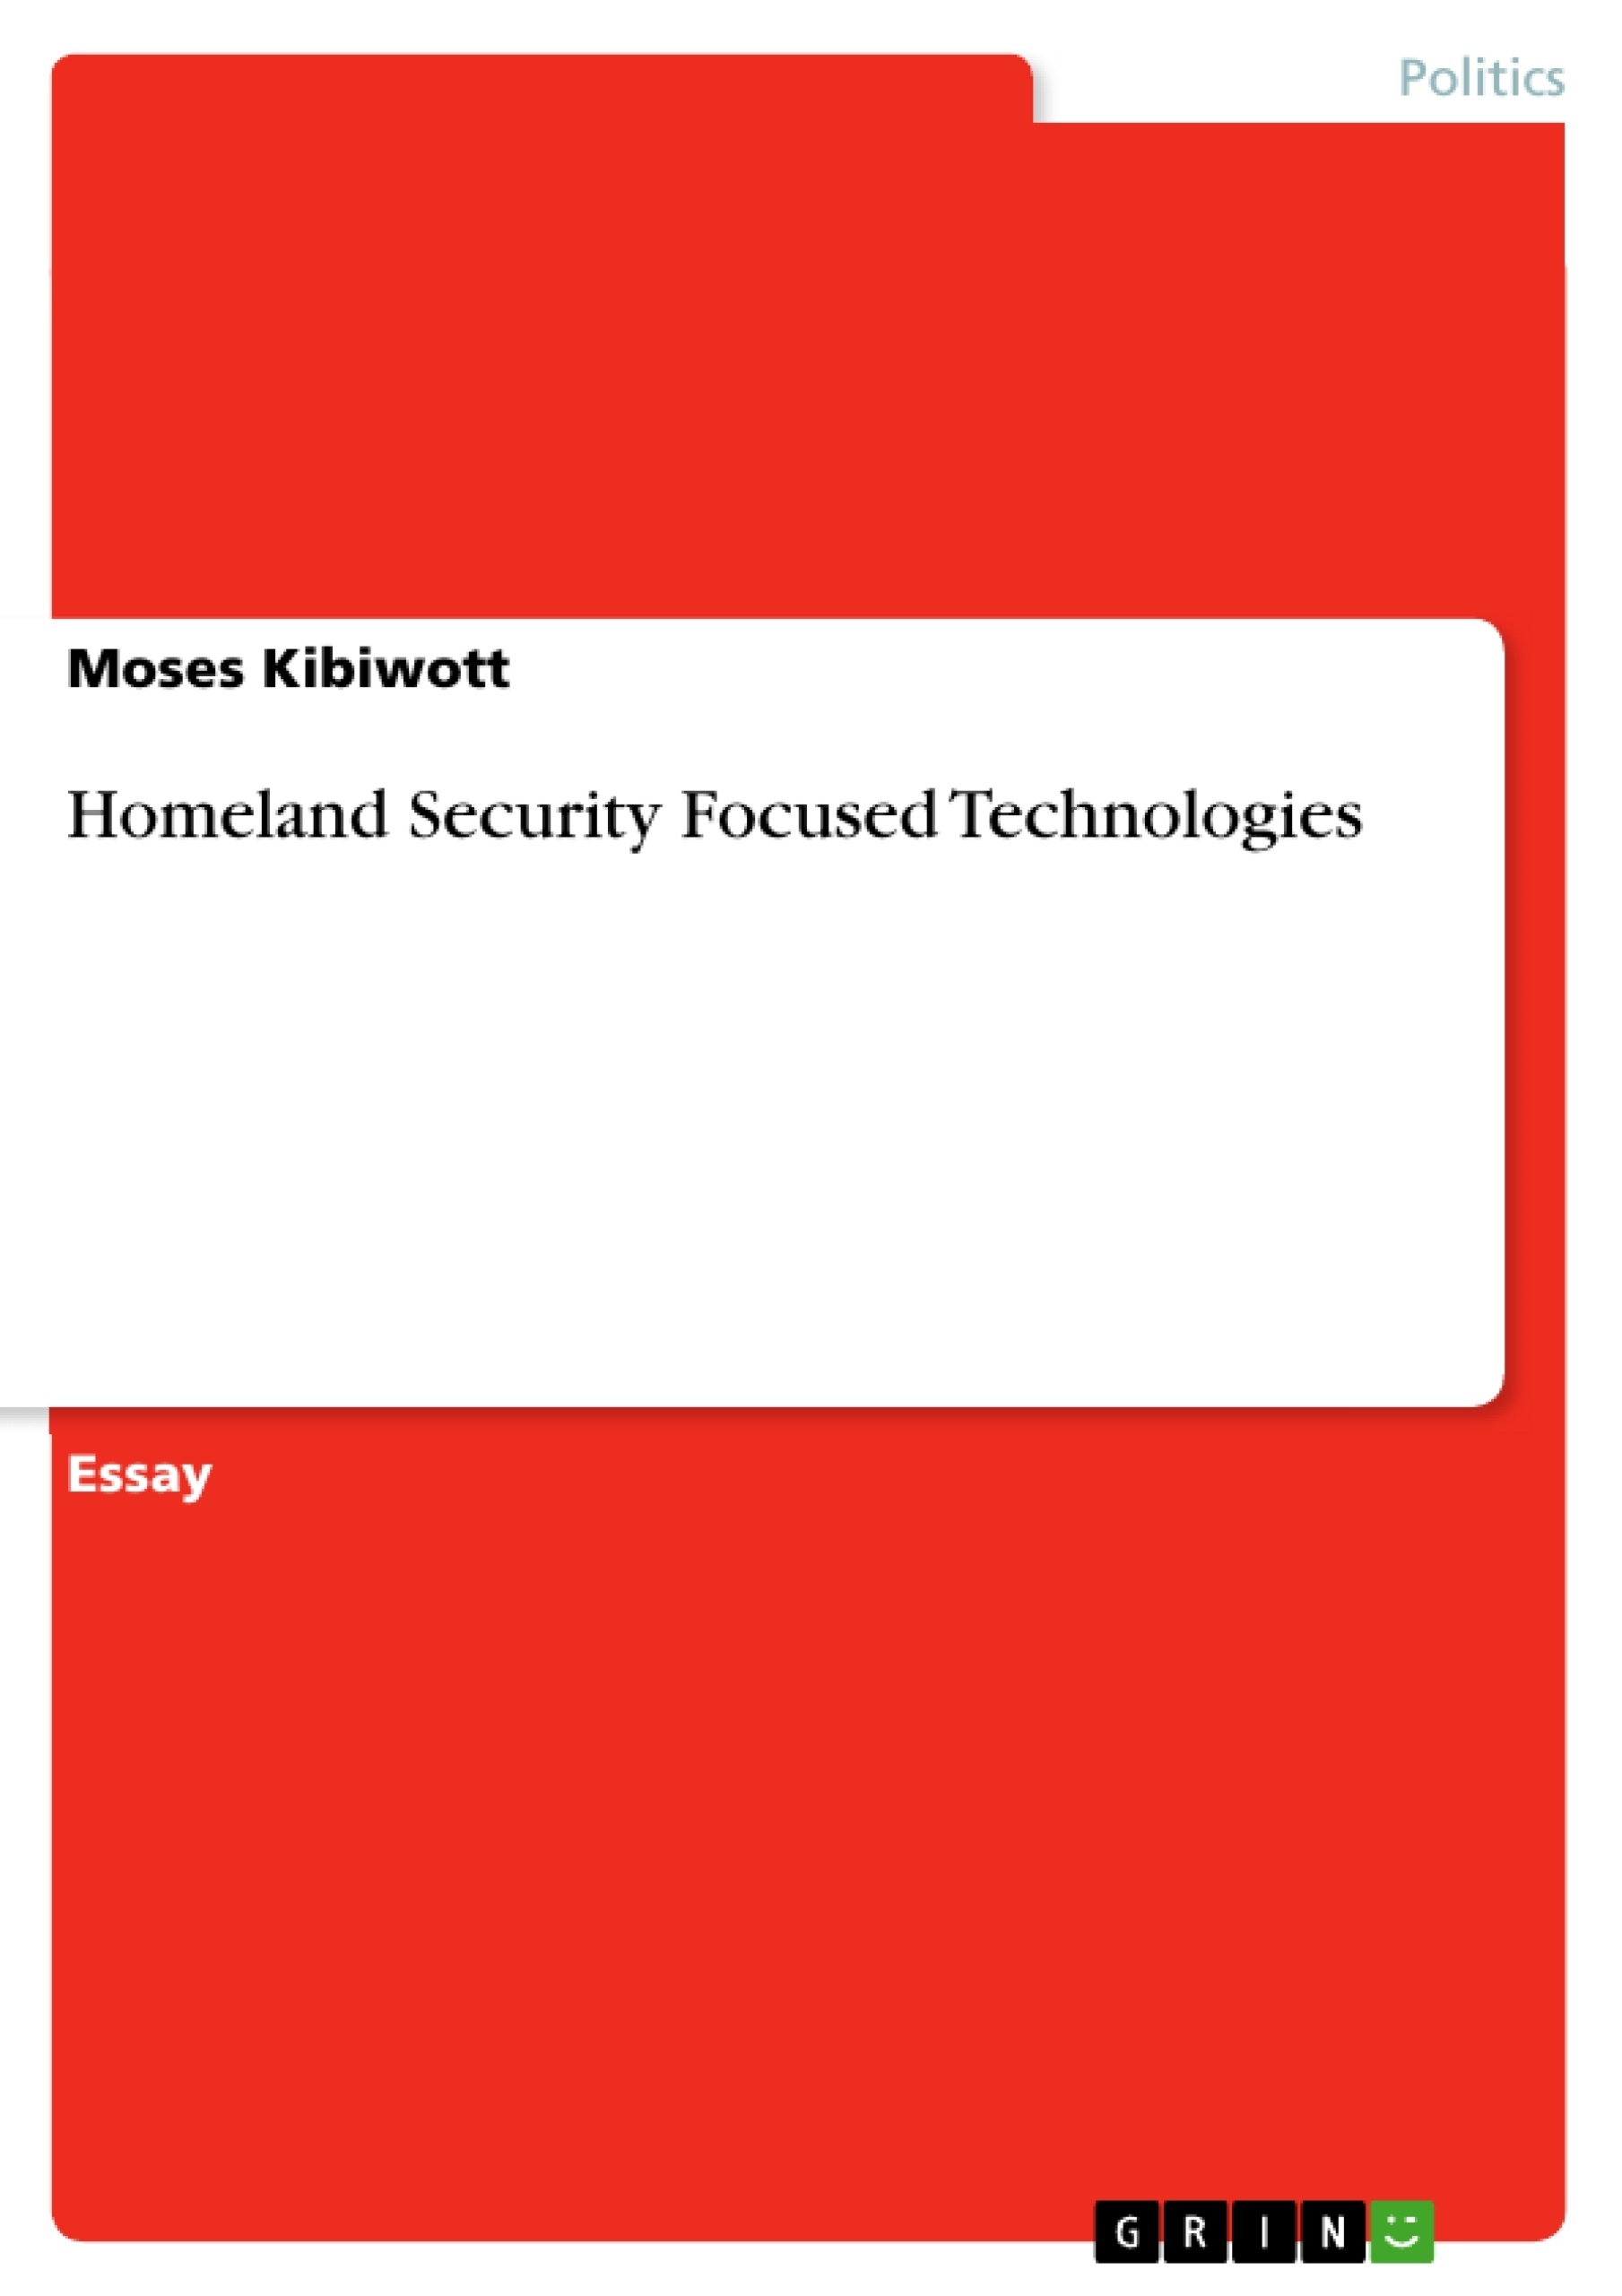 Title: Homeland Security Focused Technologies